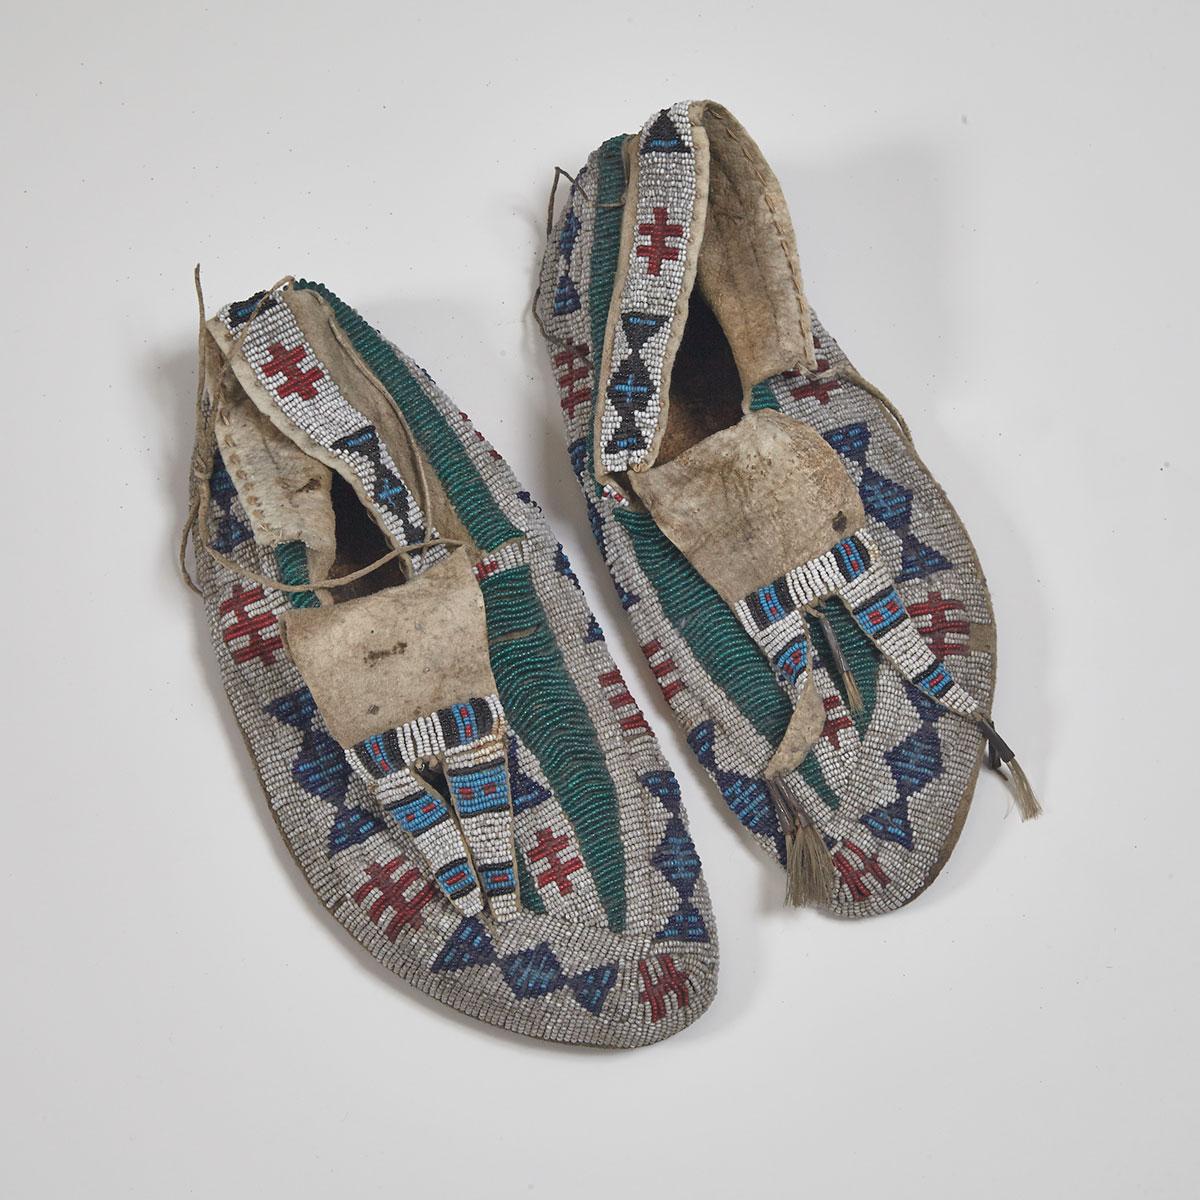 Pair of Lakota Moccasins Formerly Property of Holy Man and War Chief of the Hunkpapa Lakota Sioux, Sitting Bull (1831-1890), 19th century